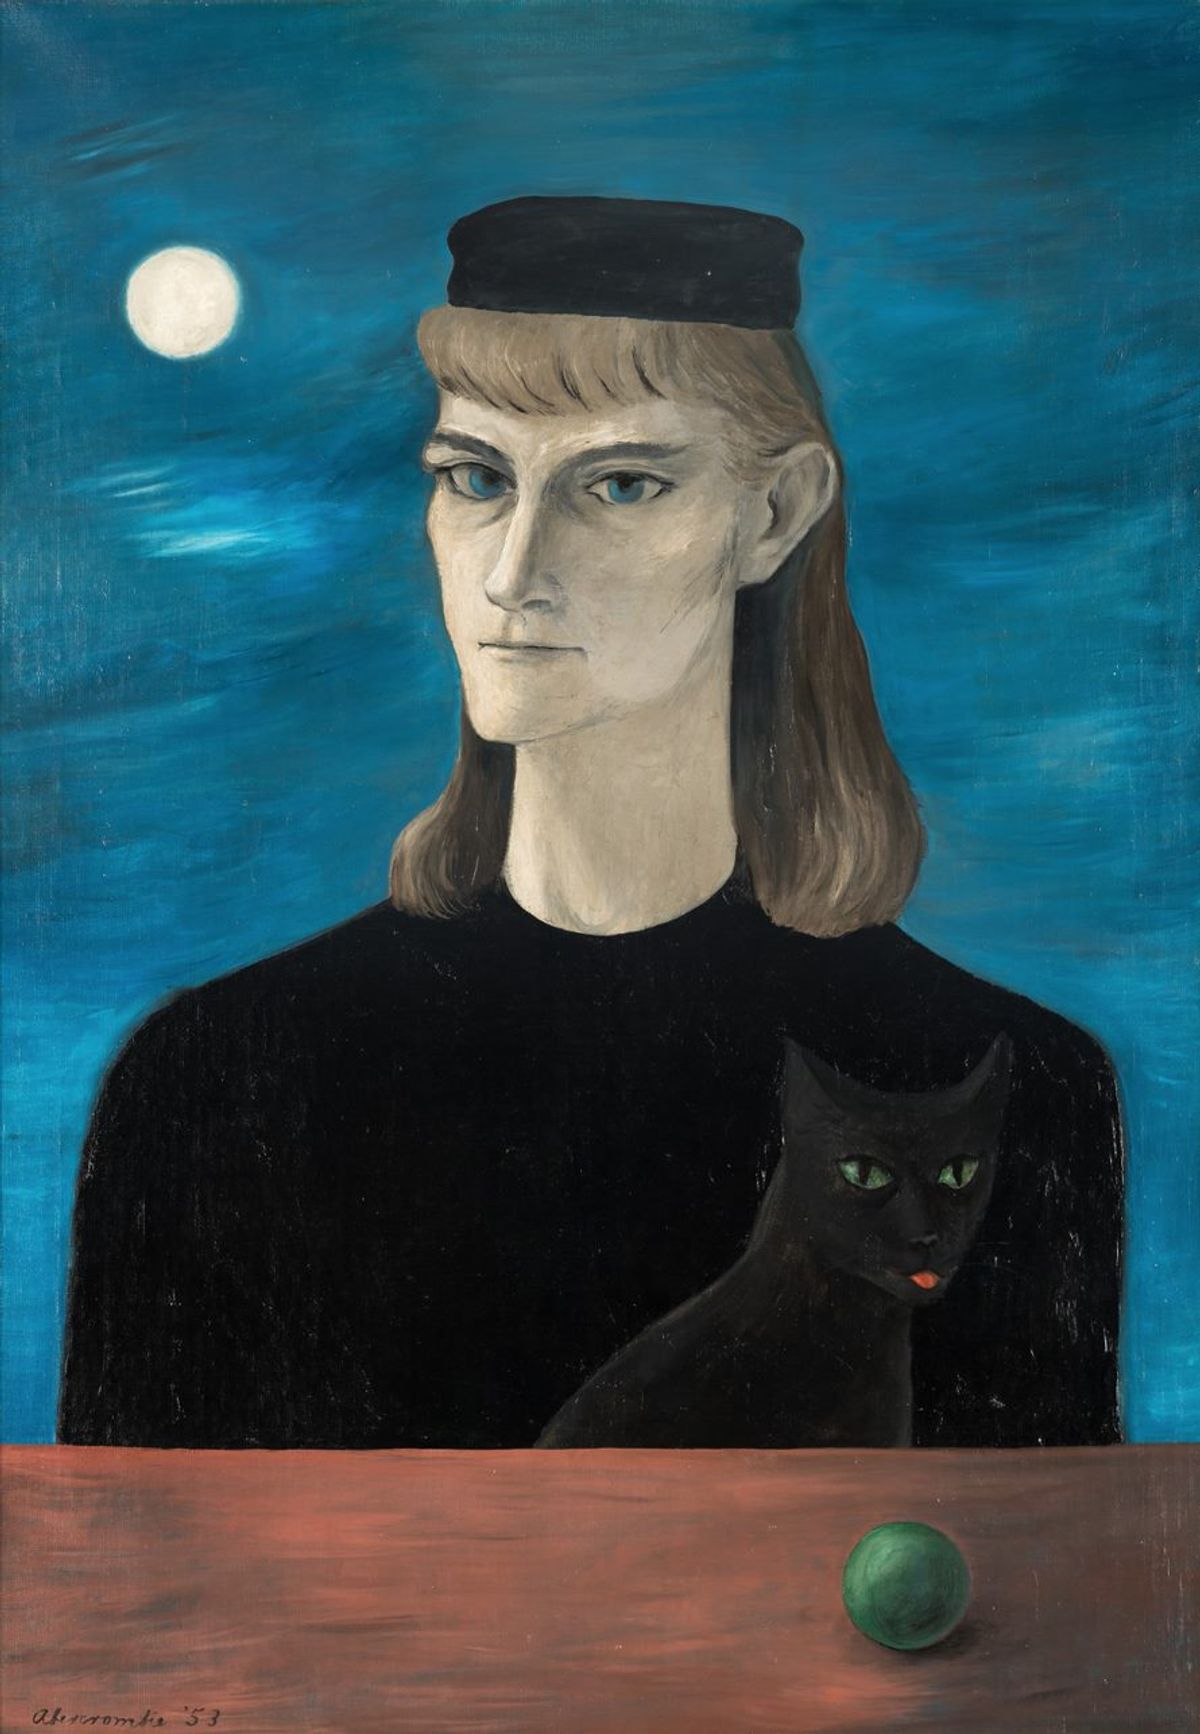 Gertrude Abercrombie, Self and Cat (Possims) (1953) (est $300,000-$500,000) at Hindman's Casting Spells: The Gertrude Abercrombie Collection of Laura and Gary Maurer on September 28. Courtesy Hindman Auctions. 